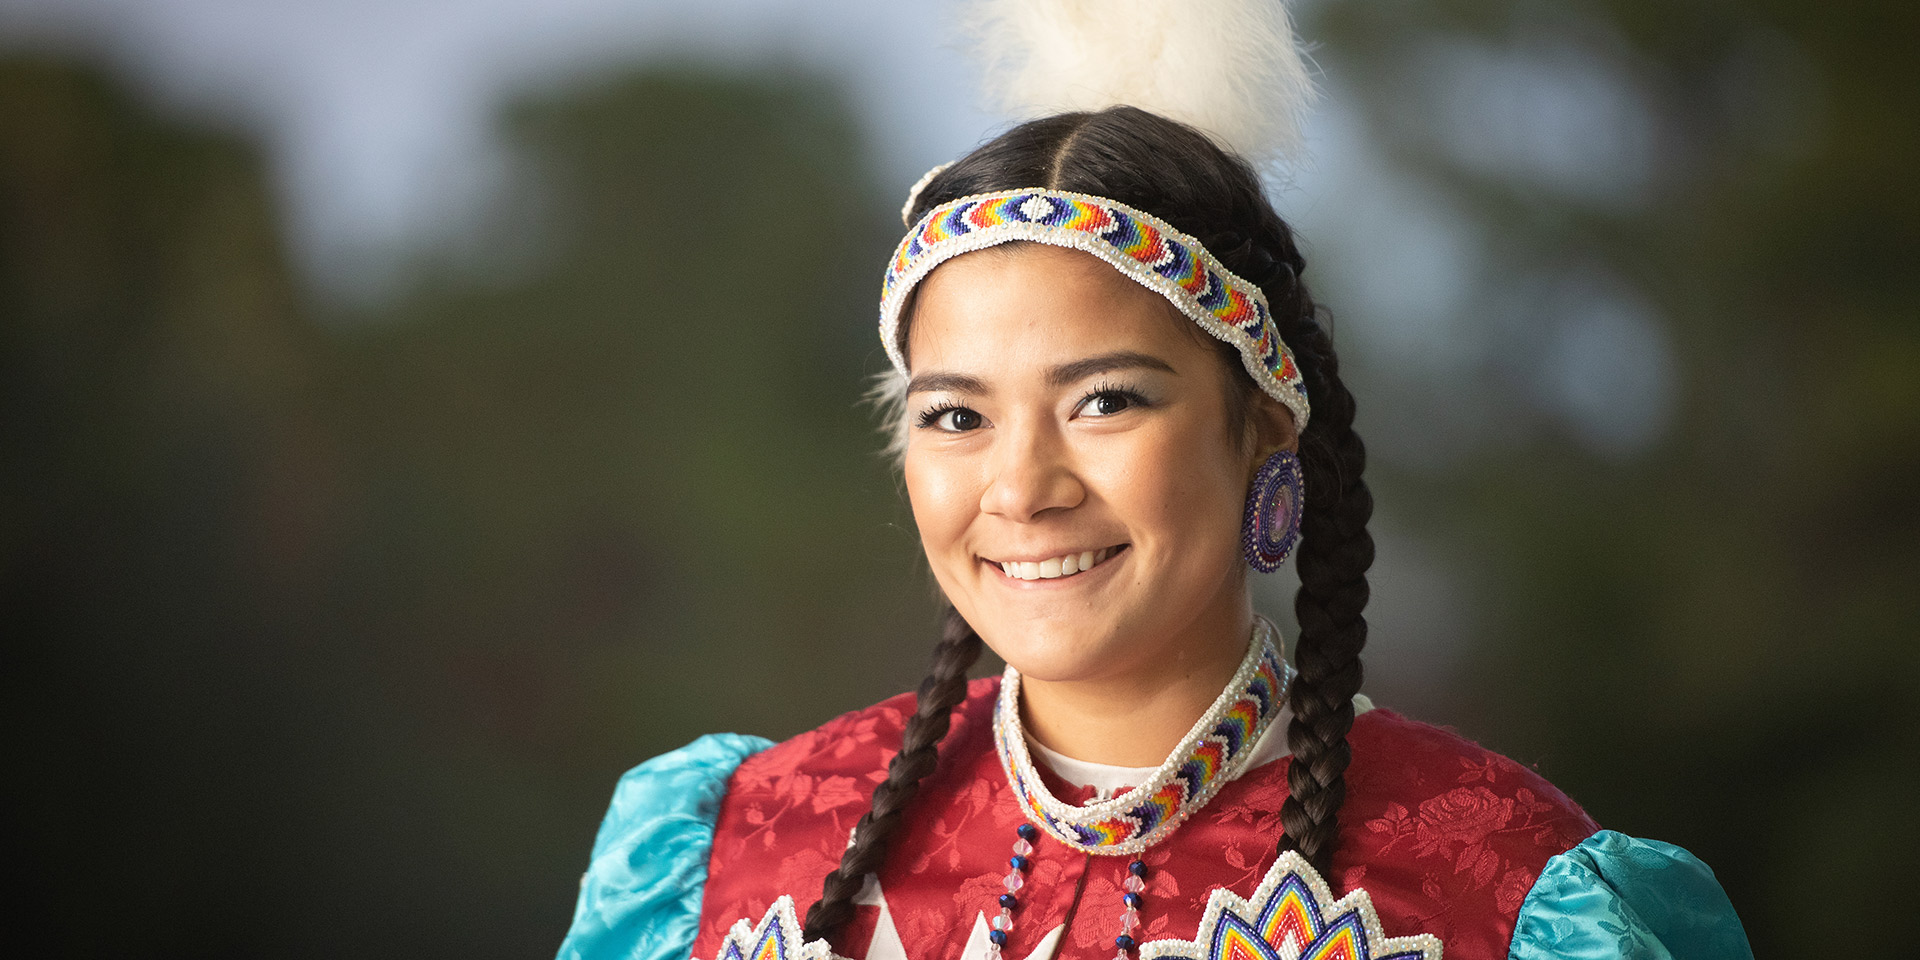 A Native American student dressed in clothing representative of her culture